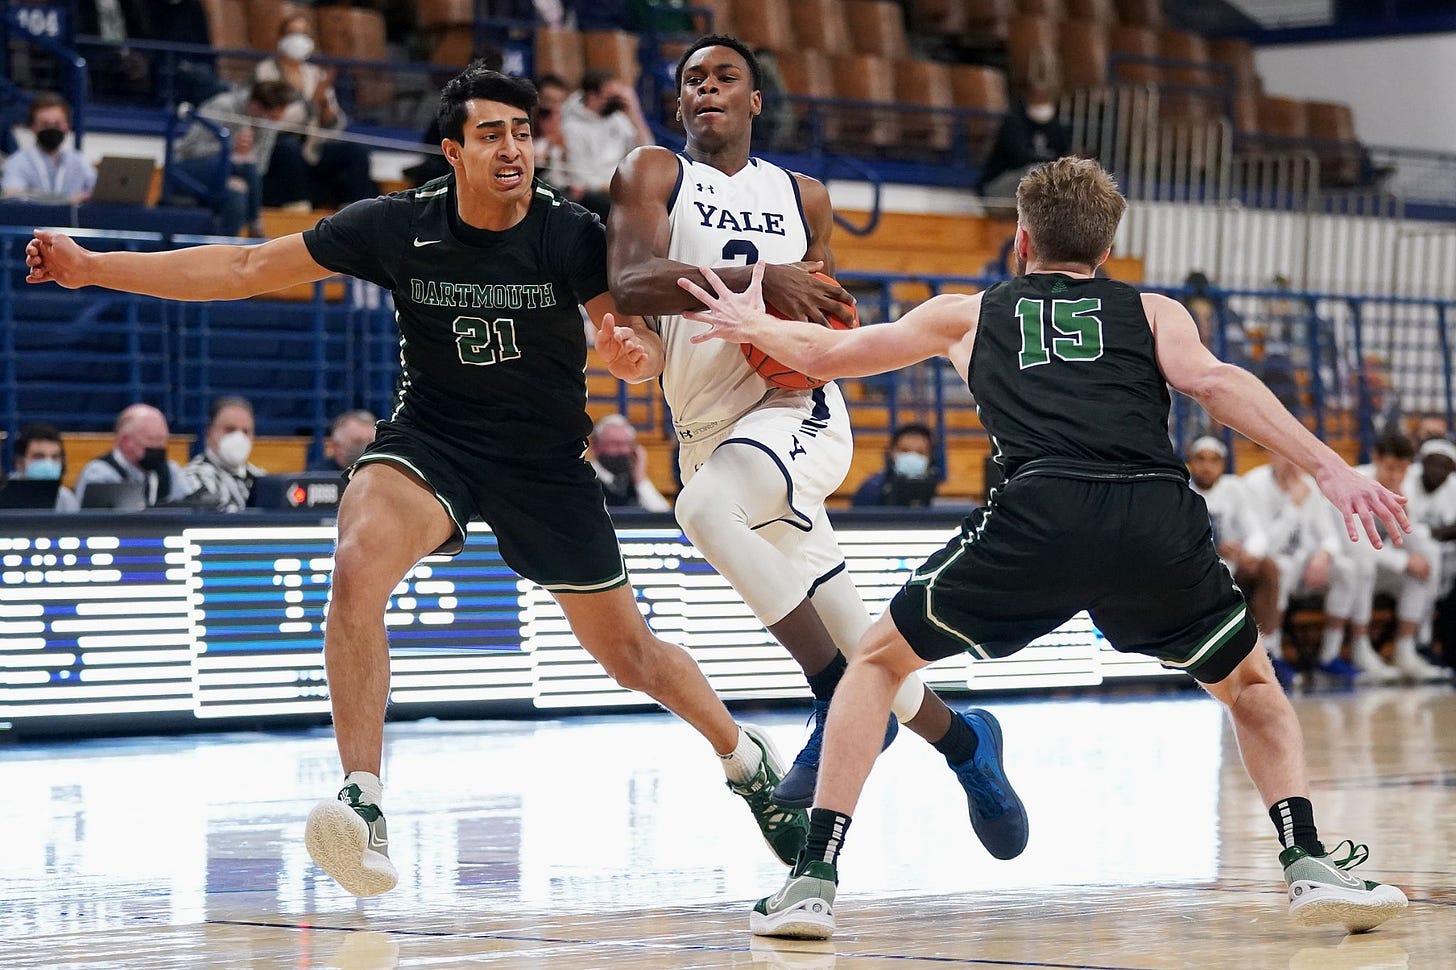 MEN'S BASKETBALL: After quick turnaround, Yale plays at Dartmouth Tuesday -  Yale Daily News